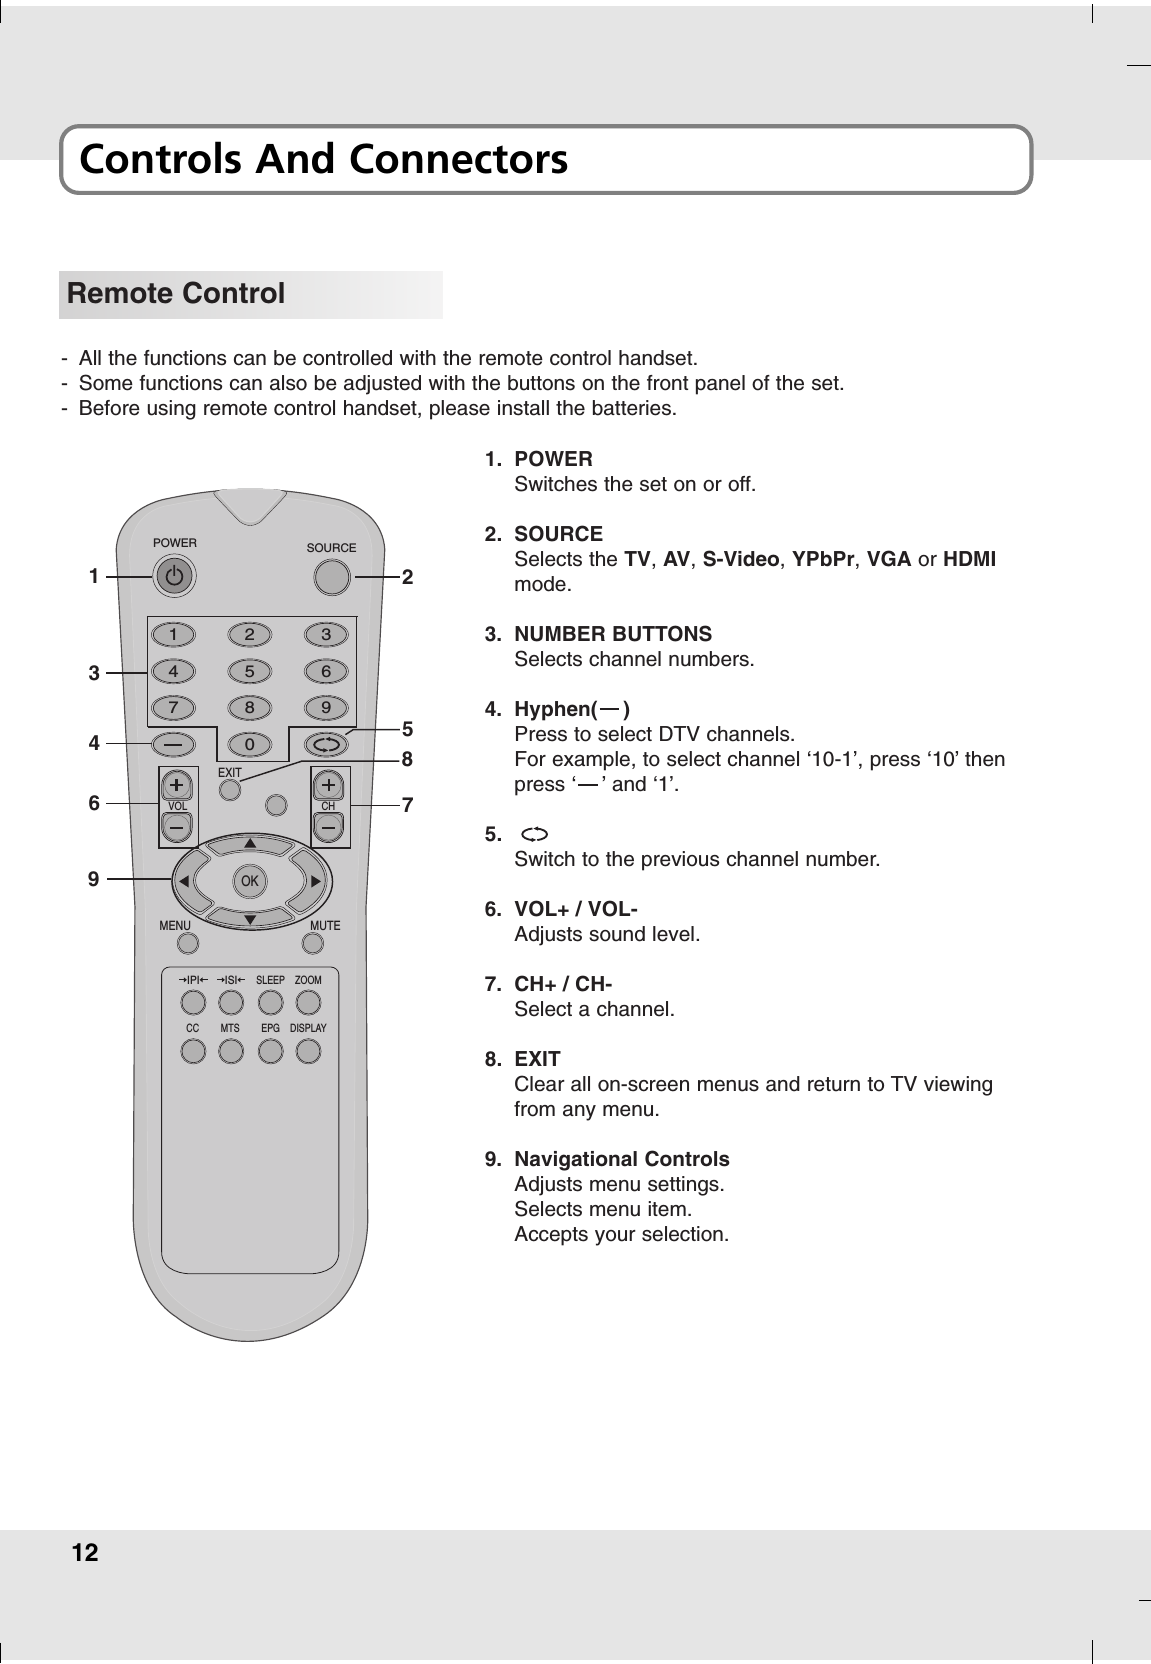 12Controls And ConnectorsRemote Control1 2 34 5 67 8 90EXITVOL CHMENU MUTEOKSOURCEPOWERSLEEP ZOOMIPI ISIEPGMTSCC DISPLAY1. POWERSwitches the set on or off.2. SOURCESelects the TV, AV,S-Video, YPbPr,VGA or HDMImode.3. NUMBER BUTTONSSelects channel numbers.4. Hyphen(    )Press to select DTV channels. For example, to select channel ‘10-1’, press ‘10’ thenpress ‘    ’ and ‘1’.5.Switch to the previous channel number.6. VOL+ / VOL-Adjusts sound level.7. CH+ / CH-Select a channel.8. EXITClear all on-screen menus and return to TV viewingfrom any menu.9. Navigational ControlsAdjusts menu settings.Selects menu item.Accepts your selection.-All the functions can be controlled with the remote control handset.-Some functions can also be adjusted with the buttons on the front panel of the set.-Before using remote control handset, please install the batteries.134625789